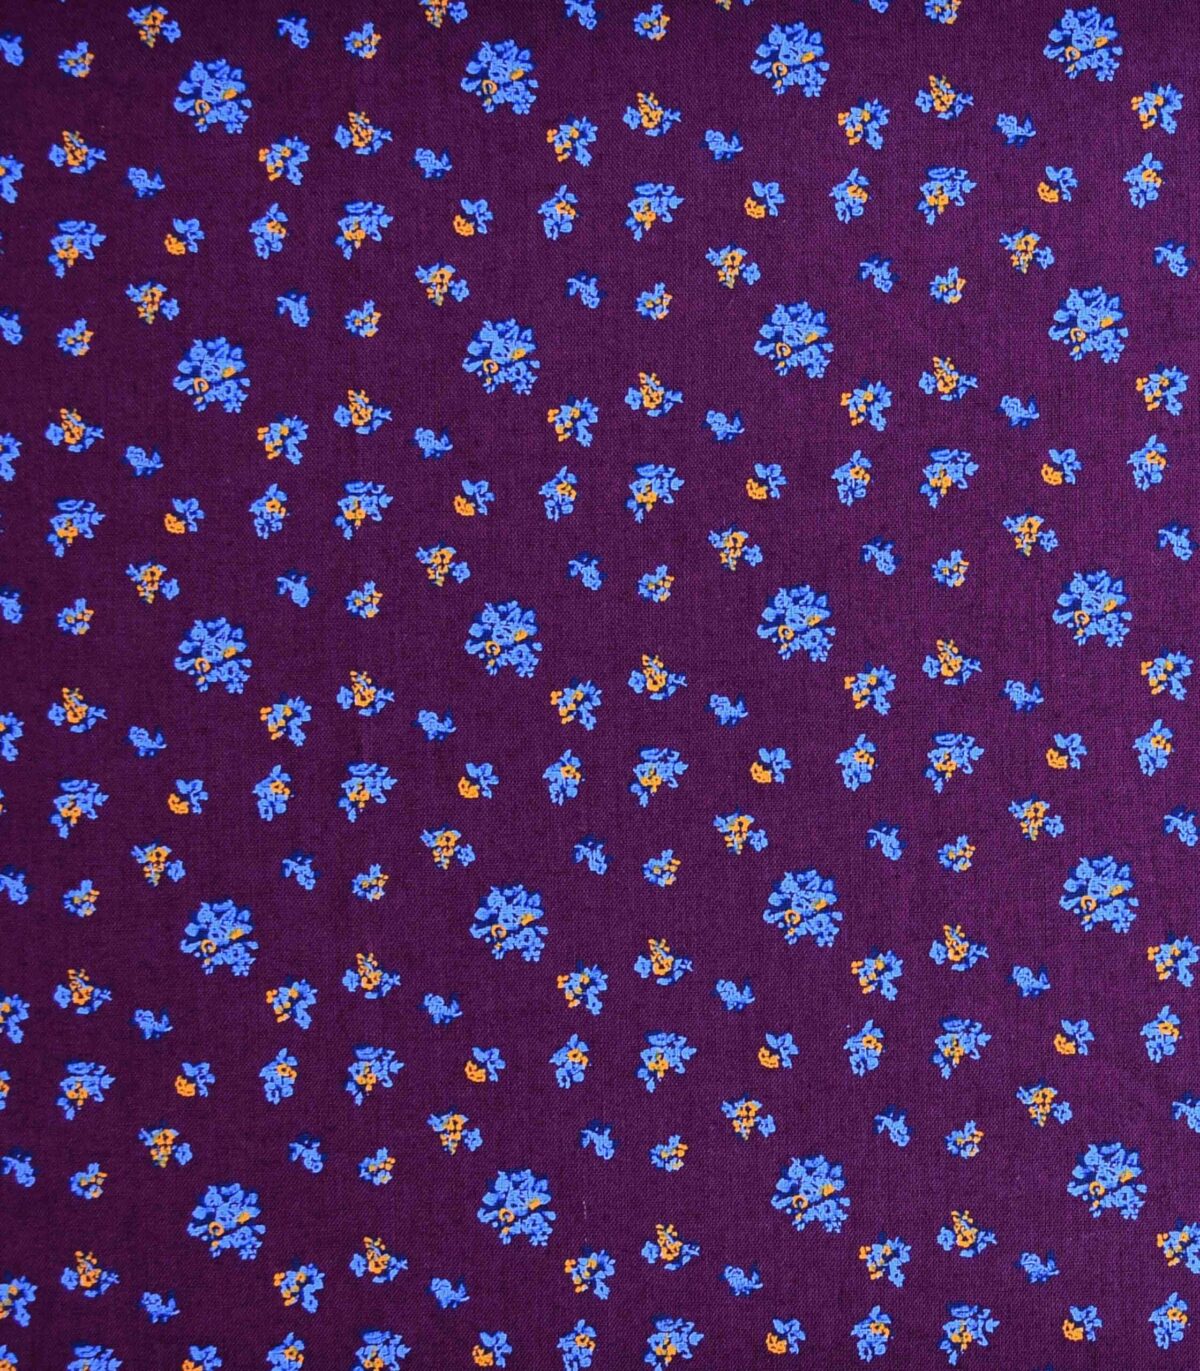 Cotton Small Flower Print Woven Fabric